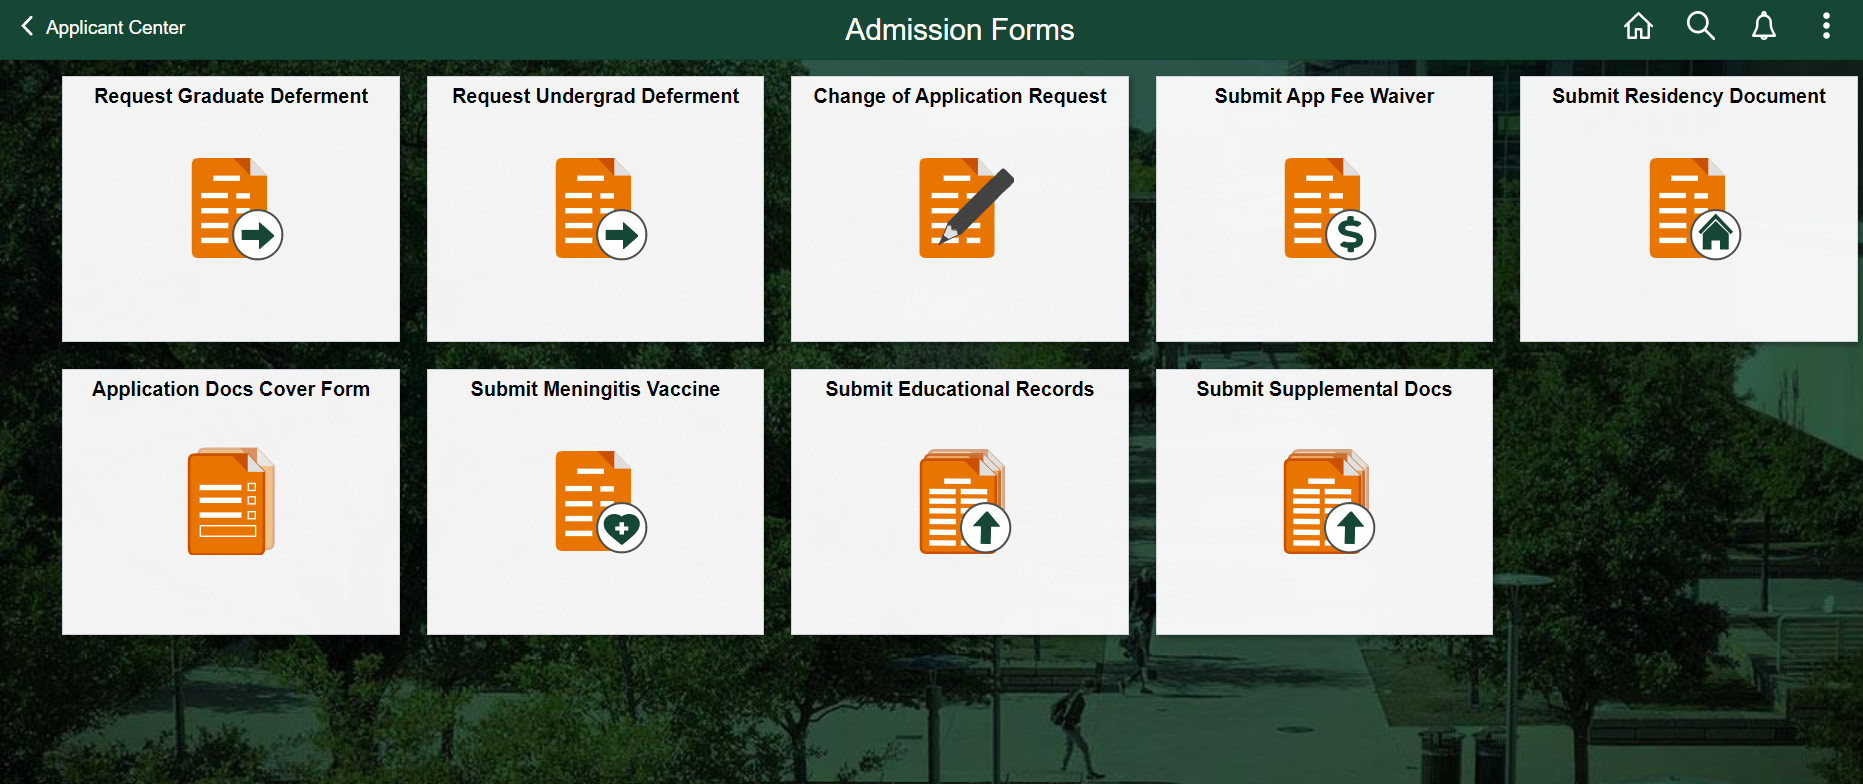 Select Admissions Forms Folder under the Orion Self-Service menu.